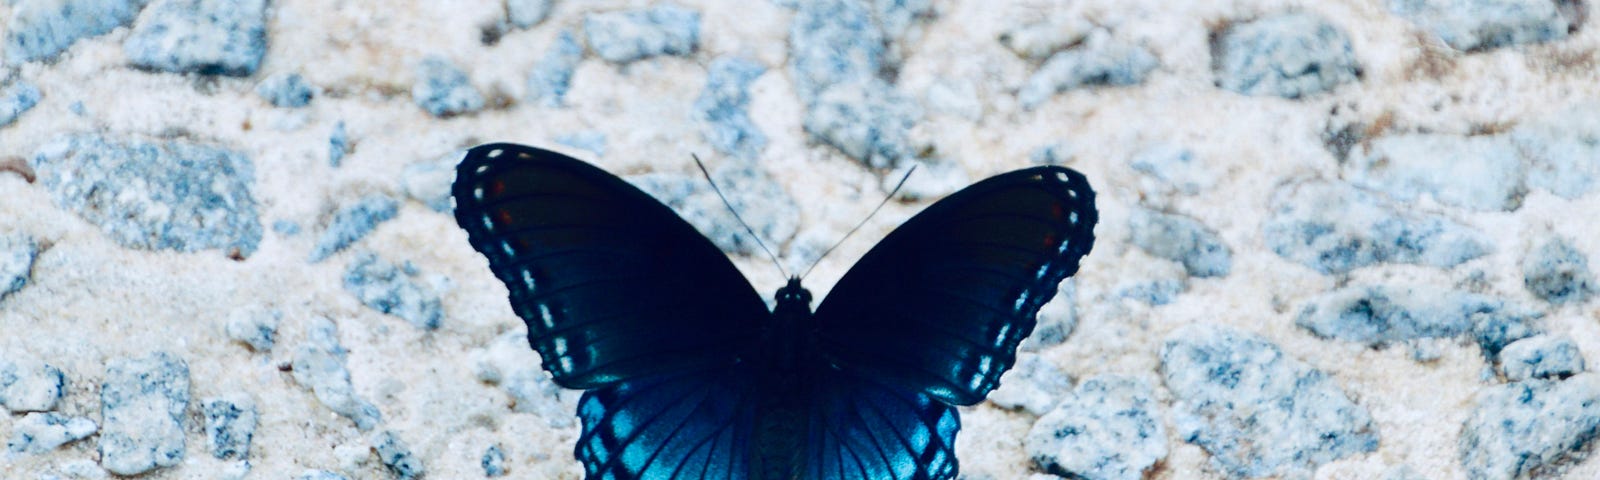 Blue and black butterfly on ground covered in pebbles.